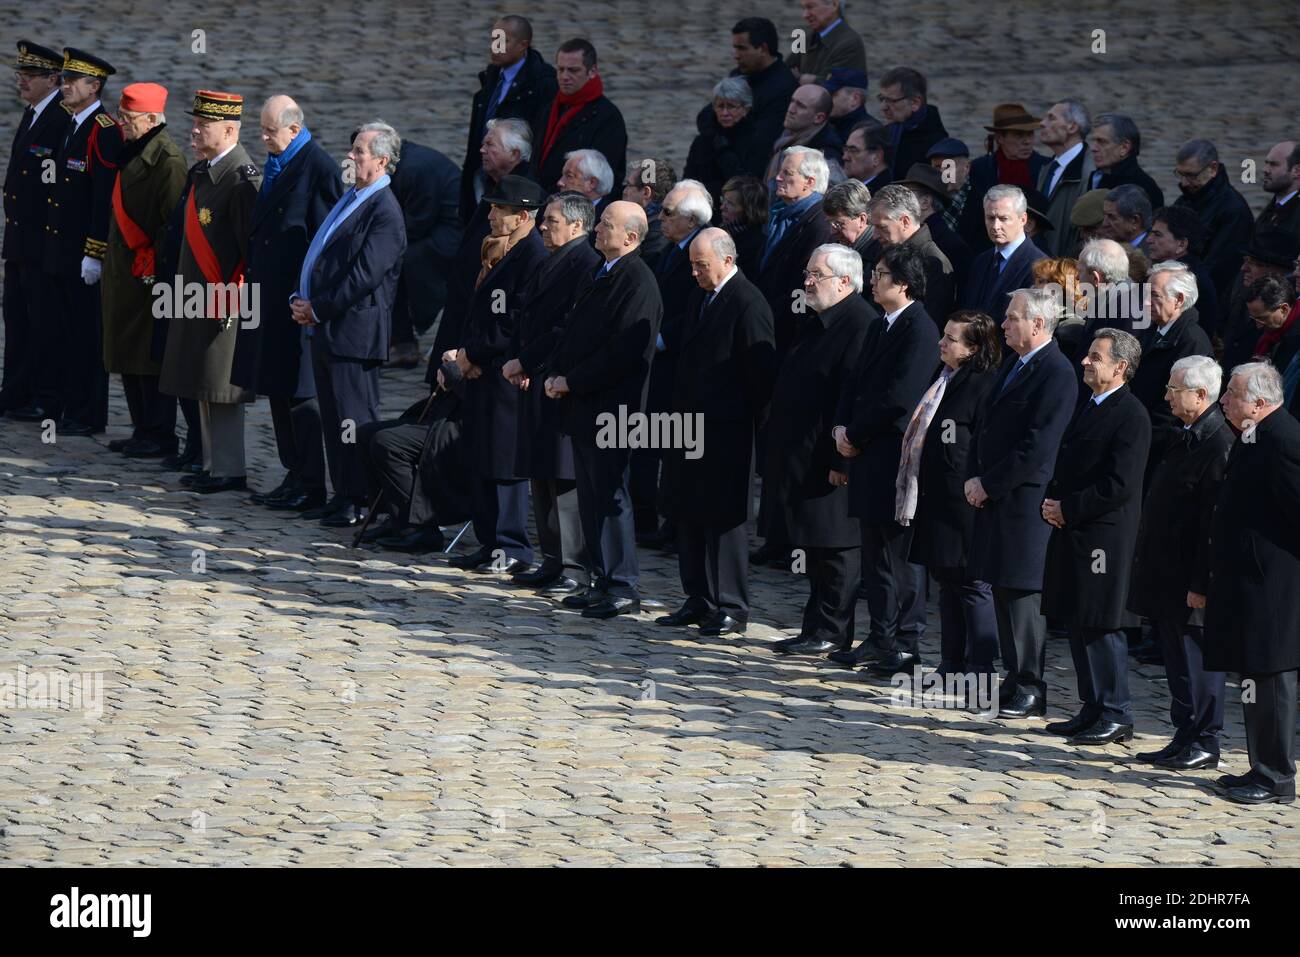 L-R : Jean-Louis Debre, Roland Dumas, Robert Badinter, Francois Fillon, Alain Juppe, Laurent Fabius, Jean-Marc Todeschini, Jean-Vincent Place, Emmanuelle Cosse, Jean-Marc Ayrault, Nicolas Sarkozy, Claude Bartolone, Gerard Larcher attend national tribute to Yves Guena, in the courtyard of the Invalides, in Paris, France on March 8, 2016. Photo by Ammar Abd Rabbo/ABACAPRESS.COM Stock Photo